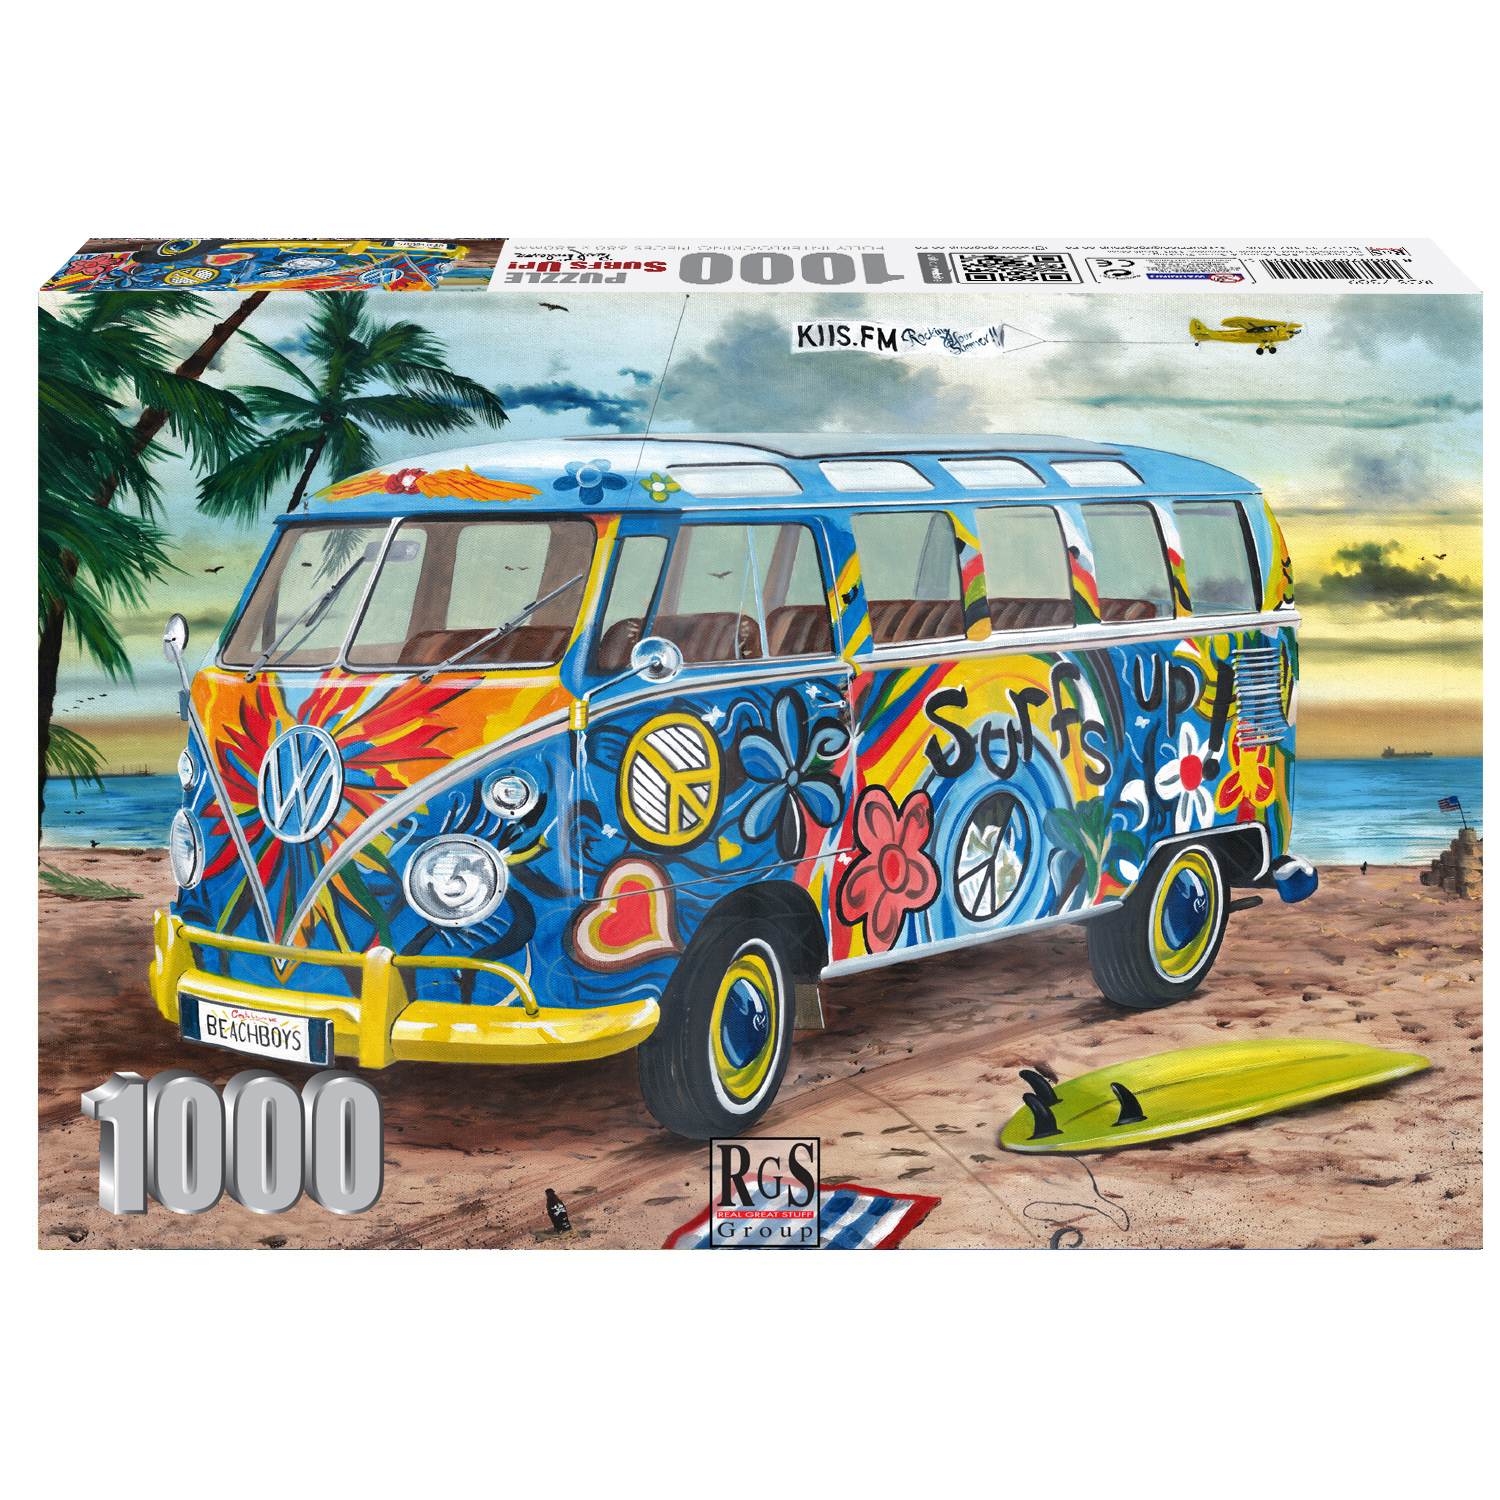 box of 1000pc puzzle of palm trees, sun, surfboard and VW Kombi